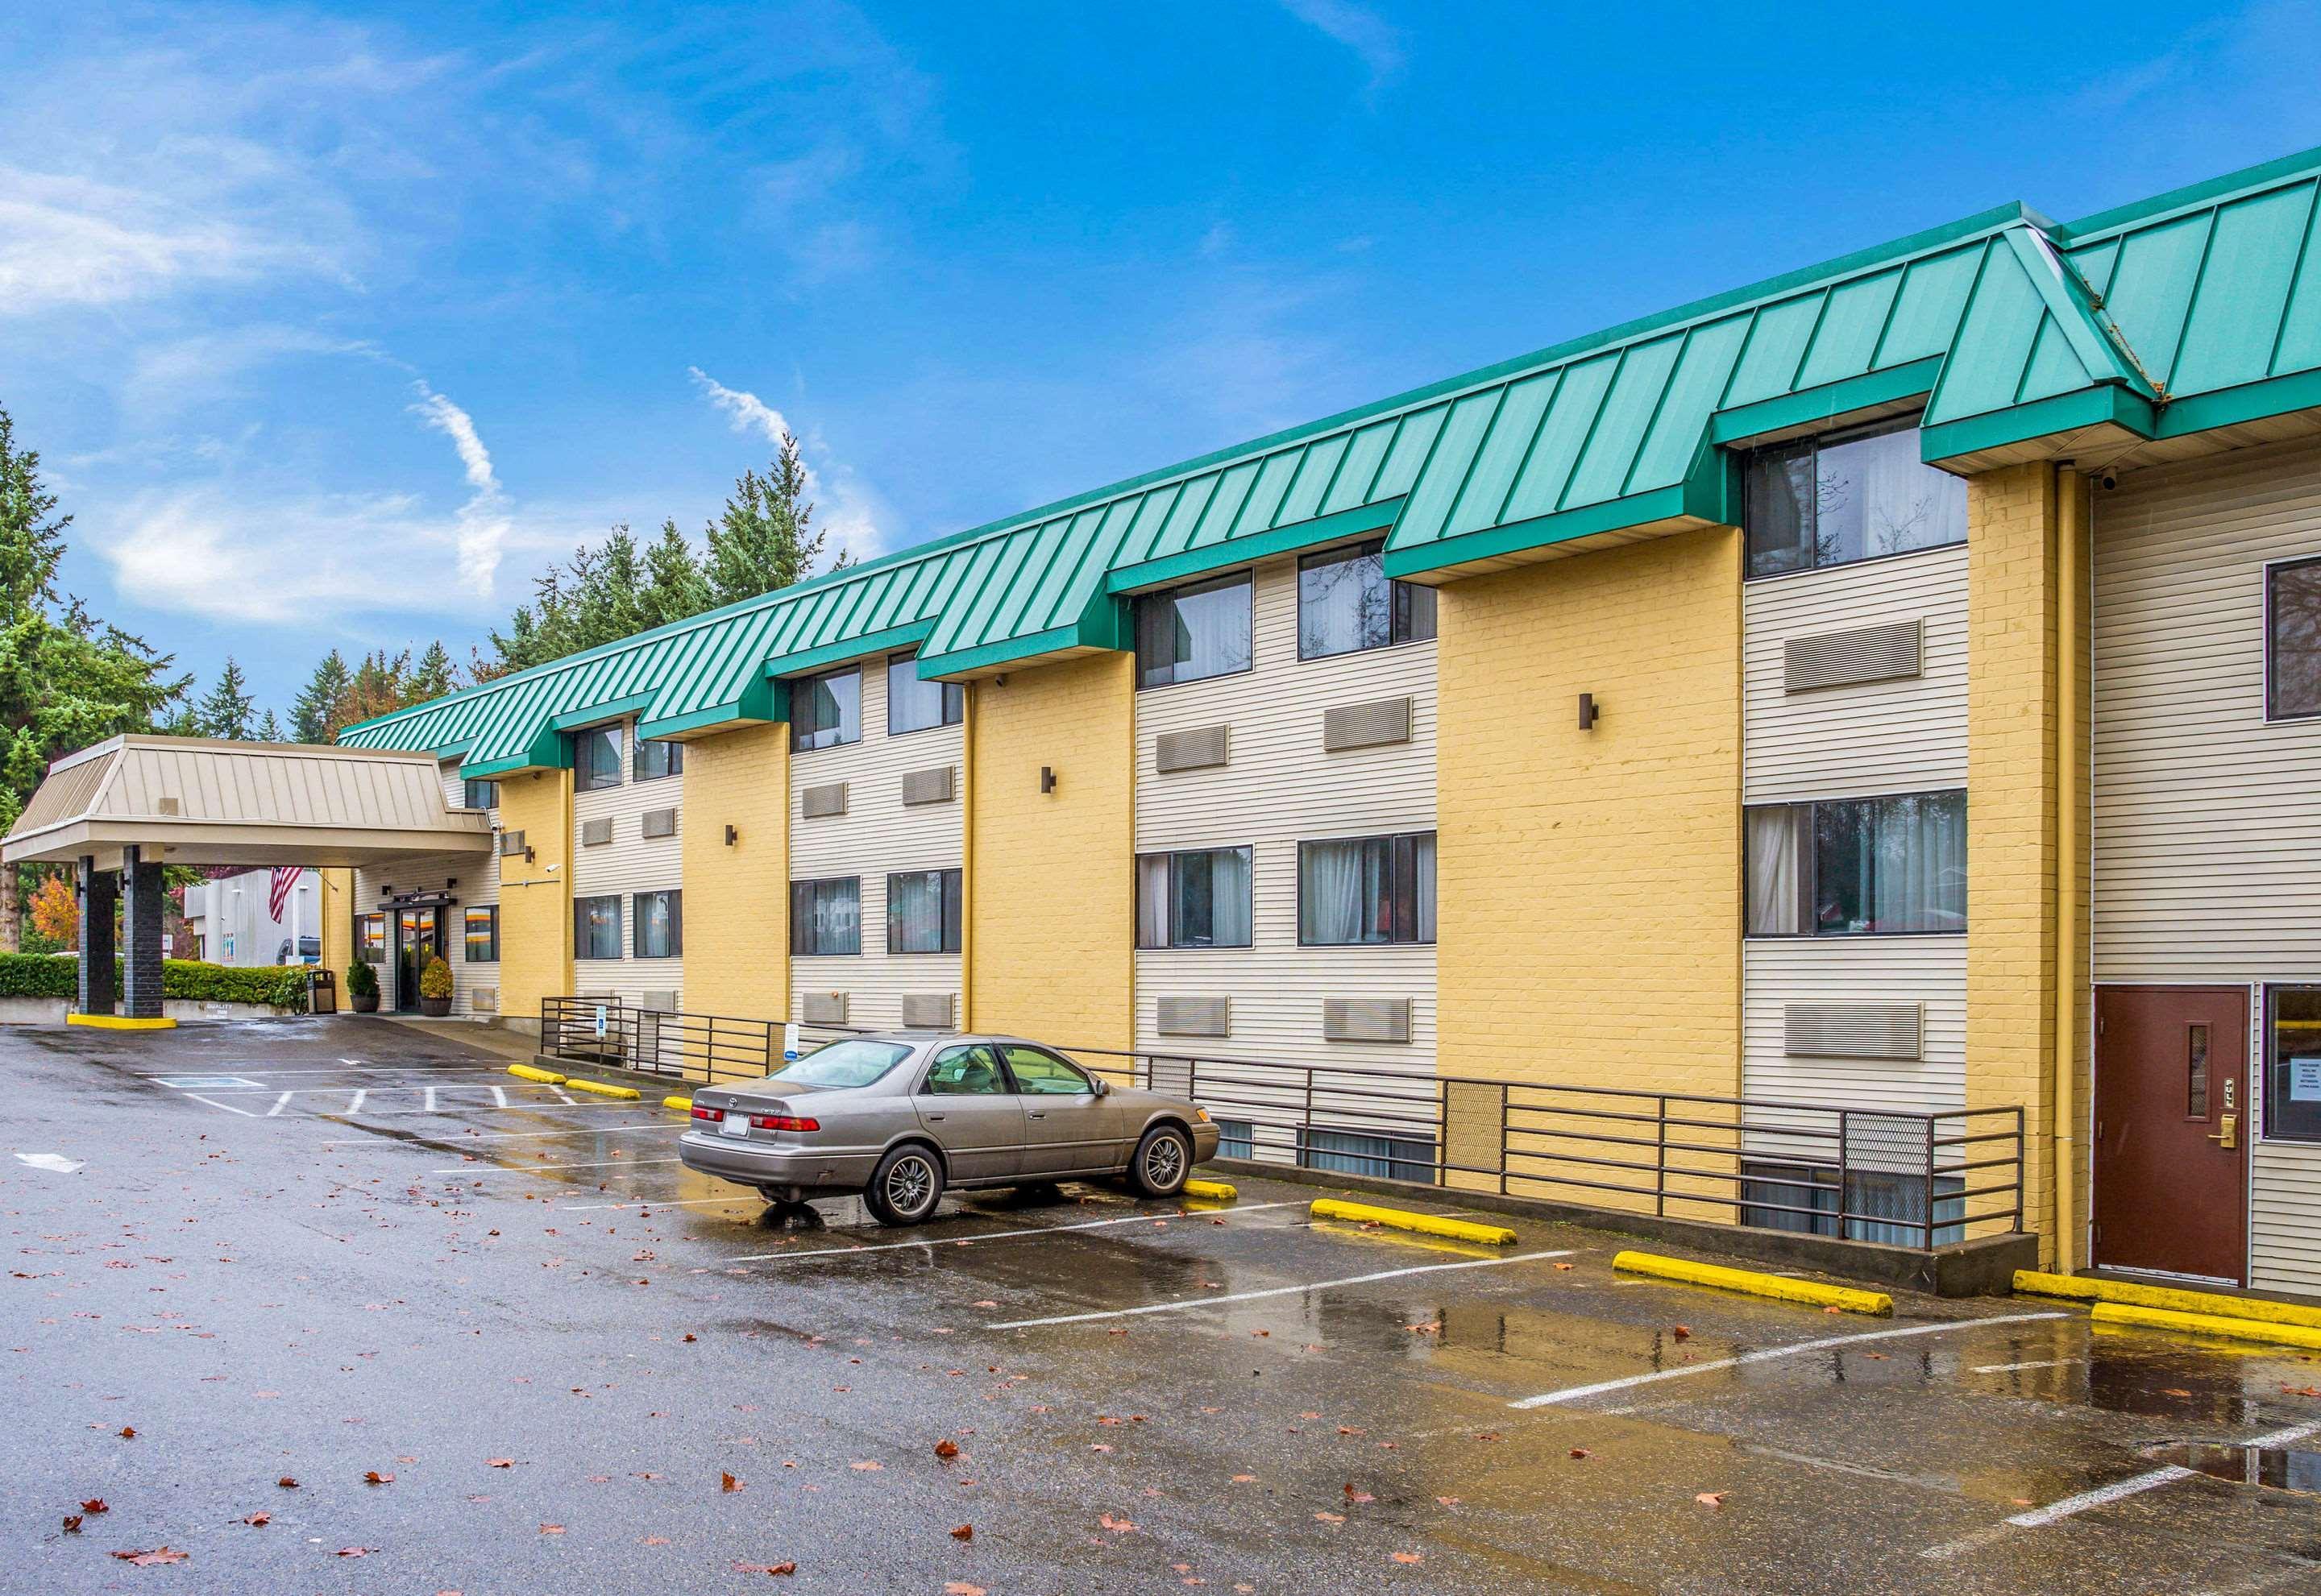 Quality Inn & Suites Lacey Olympia Exterior foto